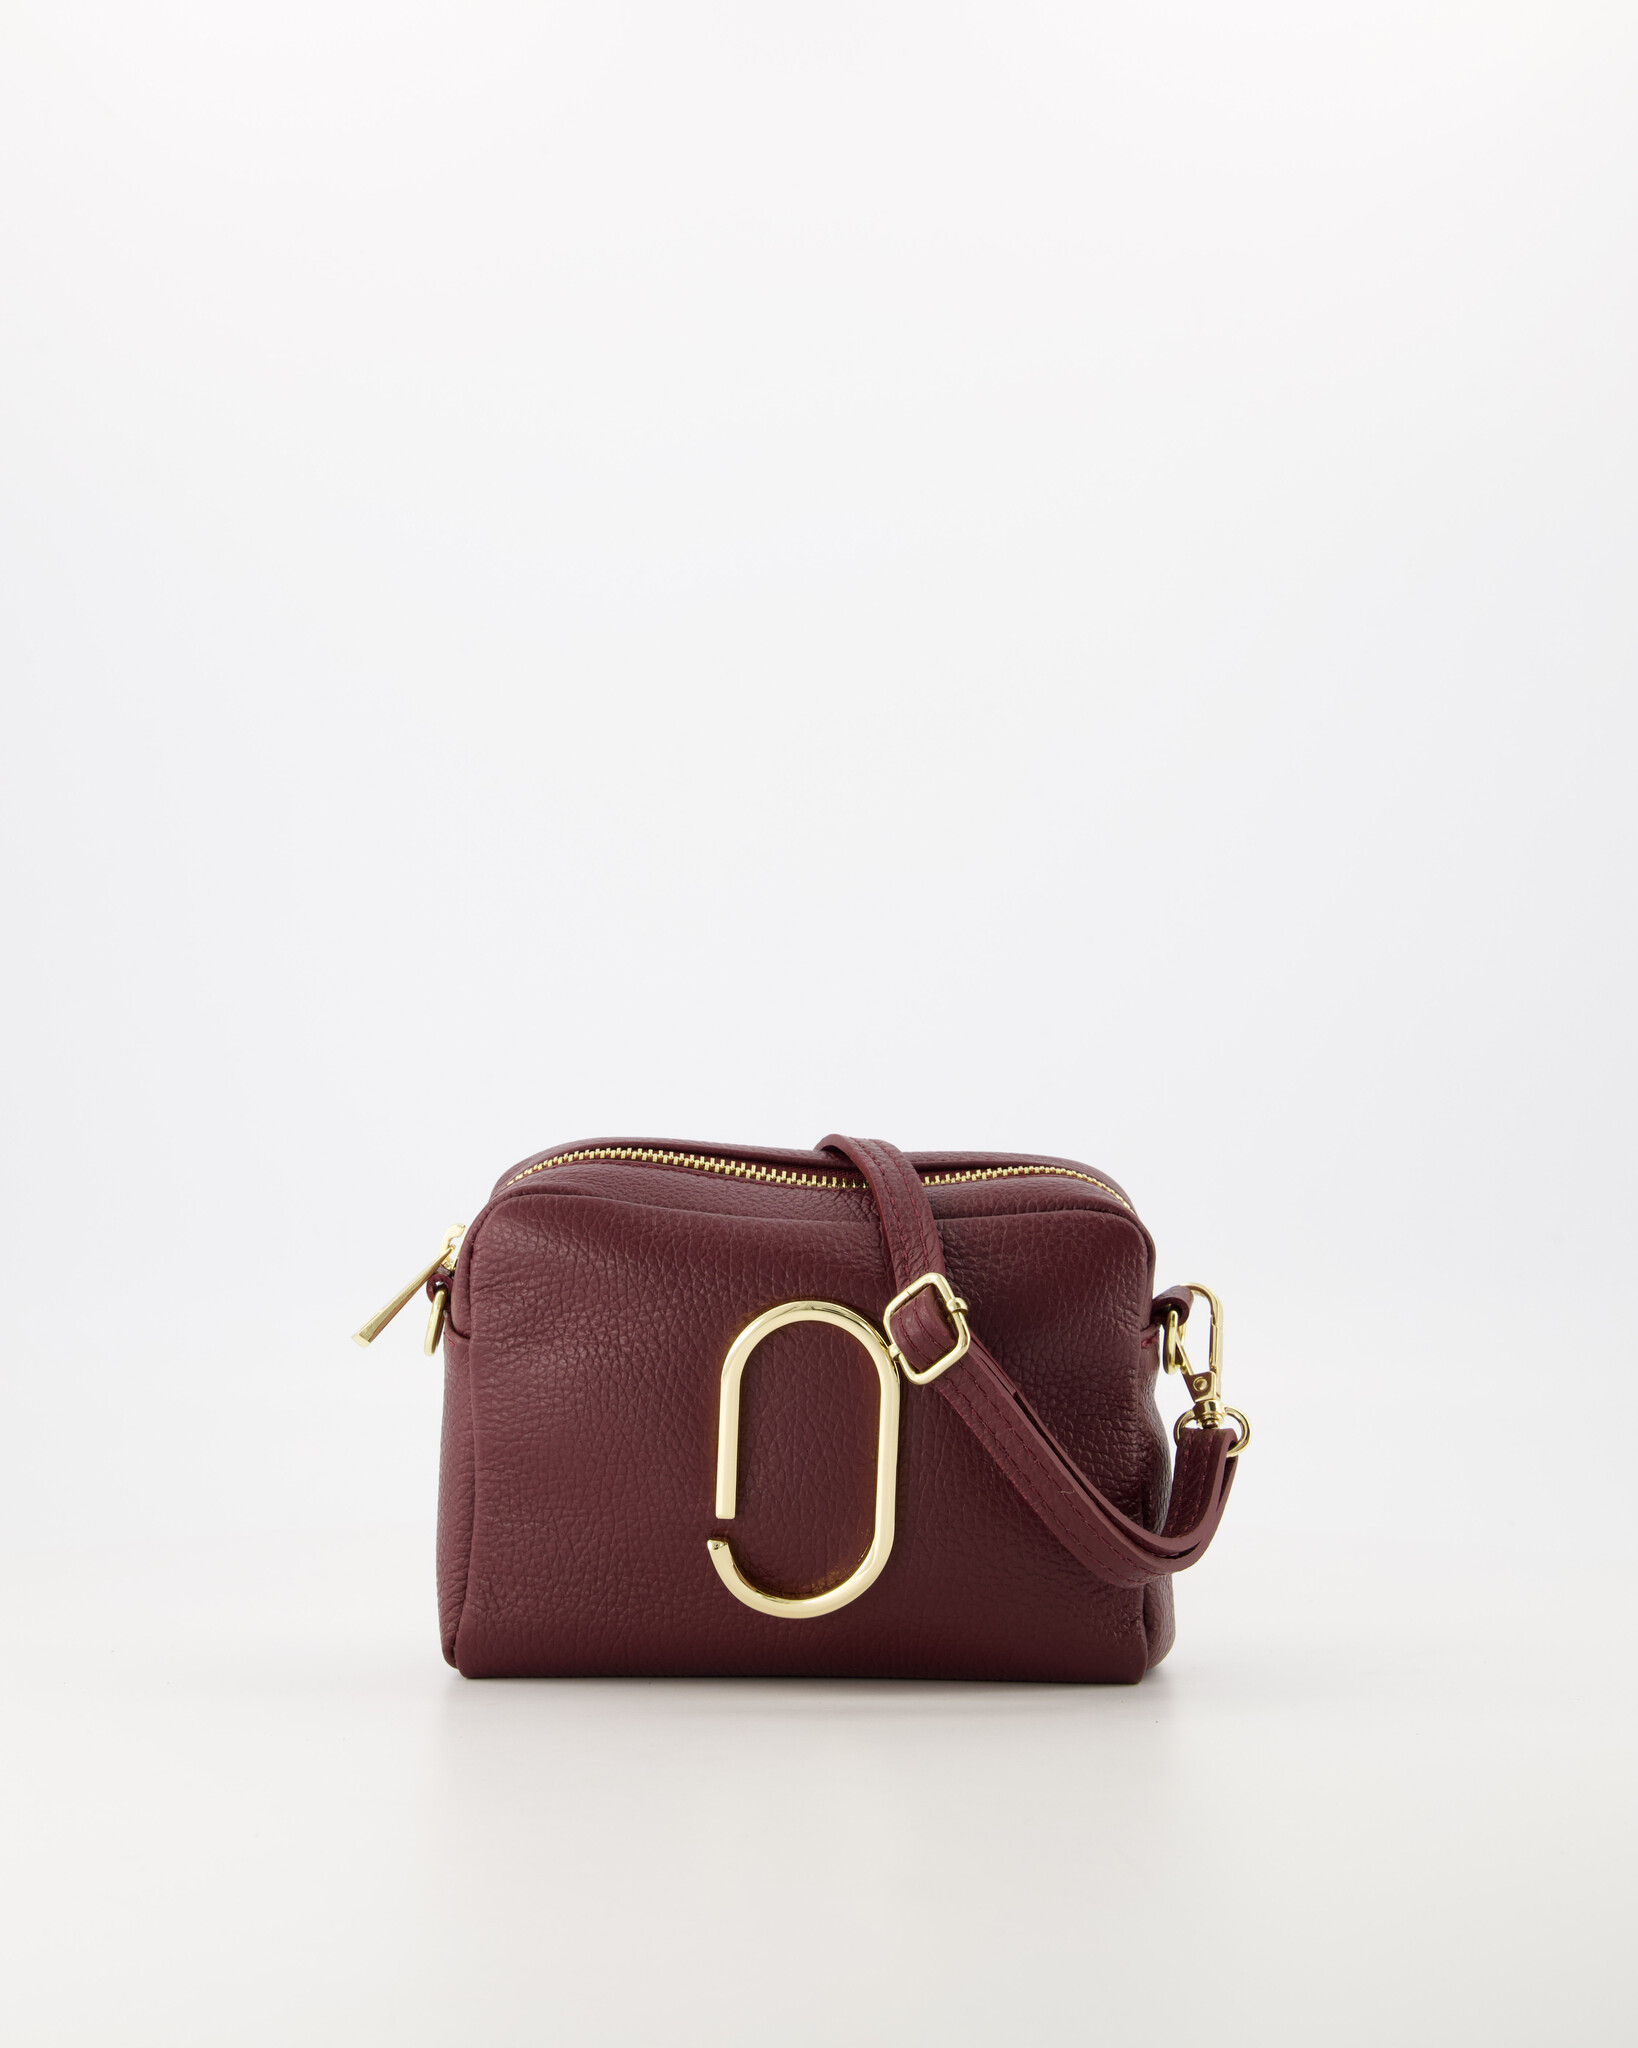 11 classic crossbody bags to complement any look this season and beyond –  Emirates Woman